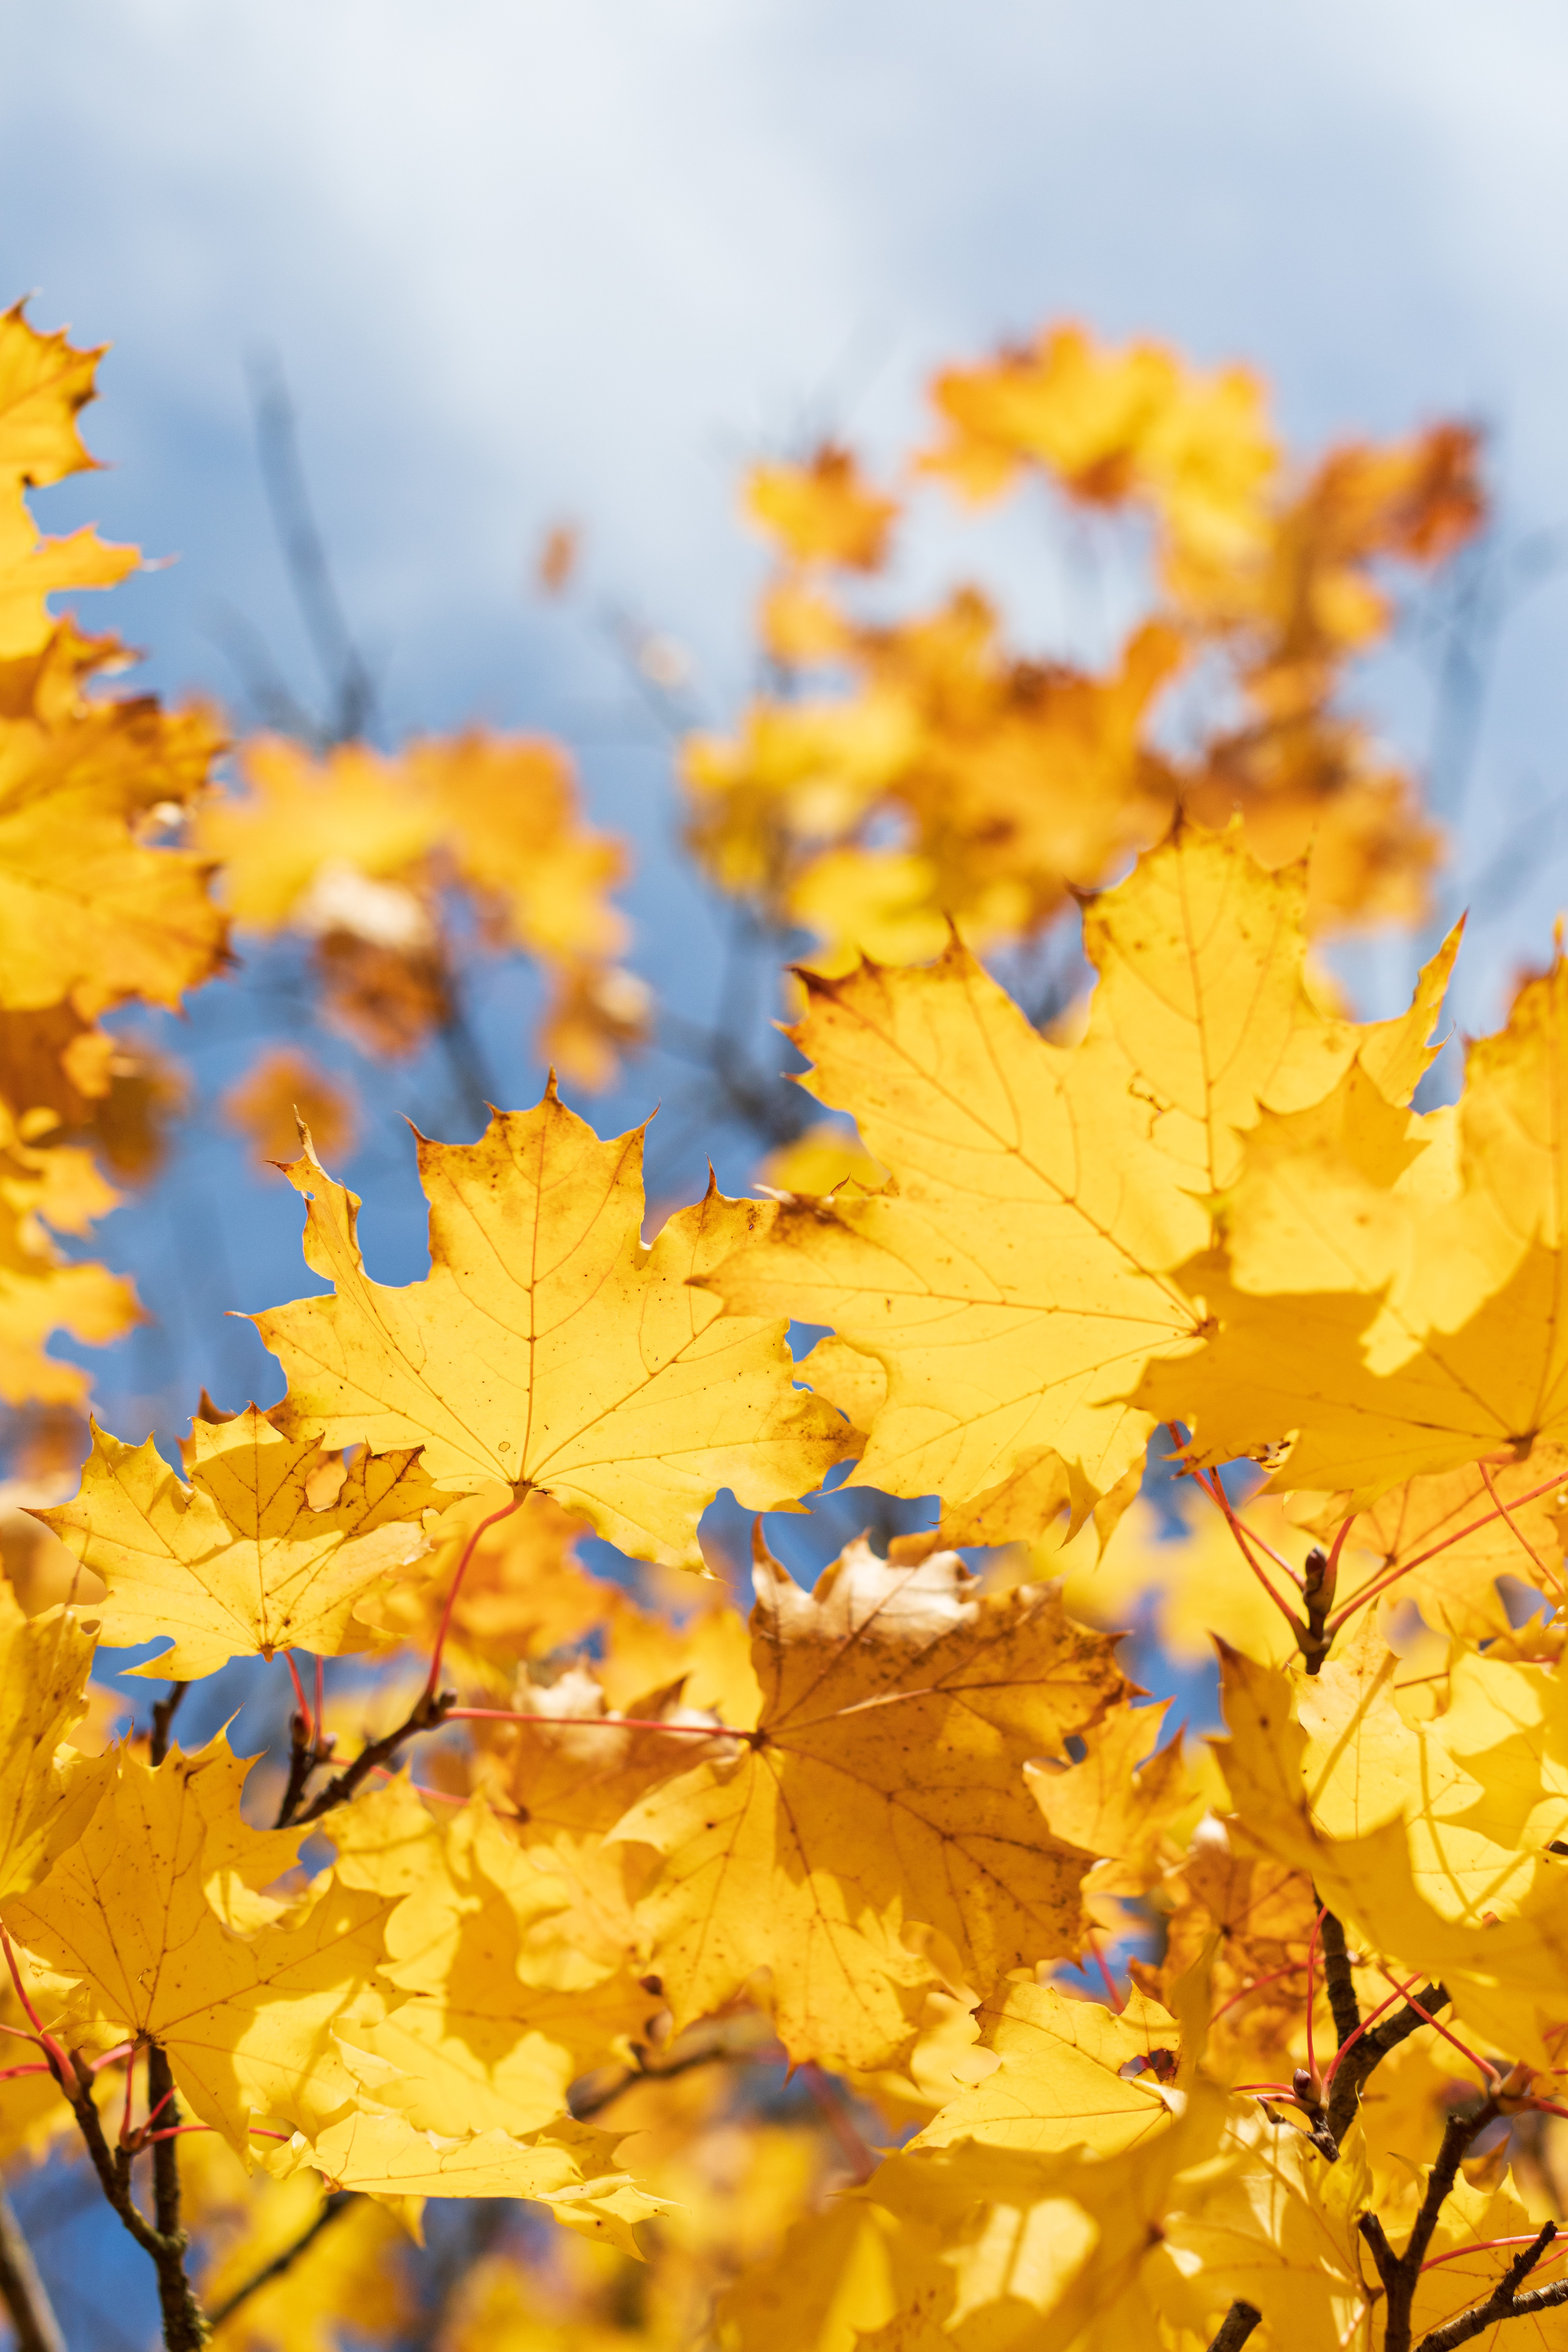 dry, autumn, maple, nature HD Wallpaper for Phone